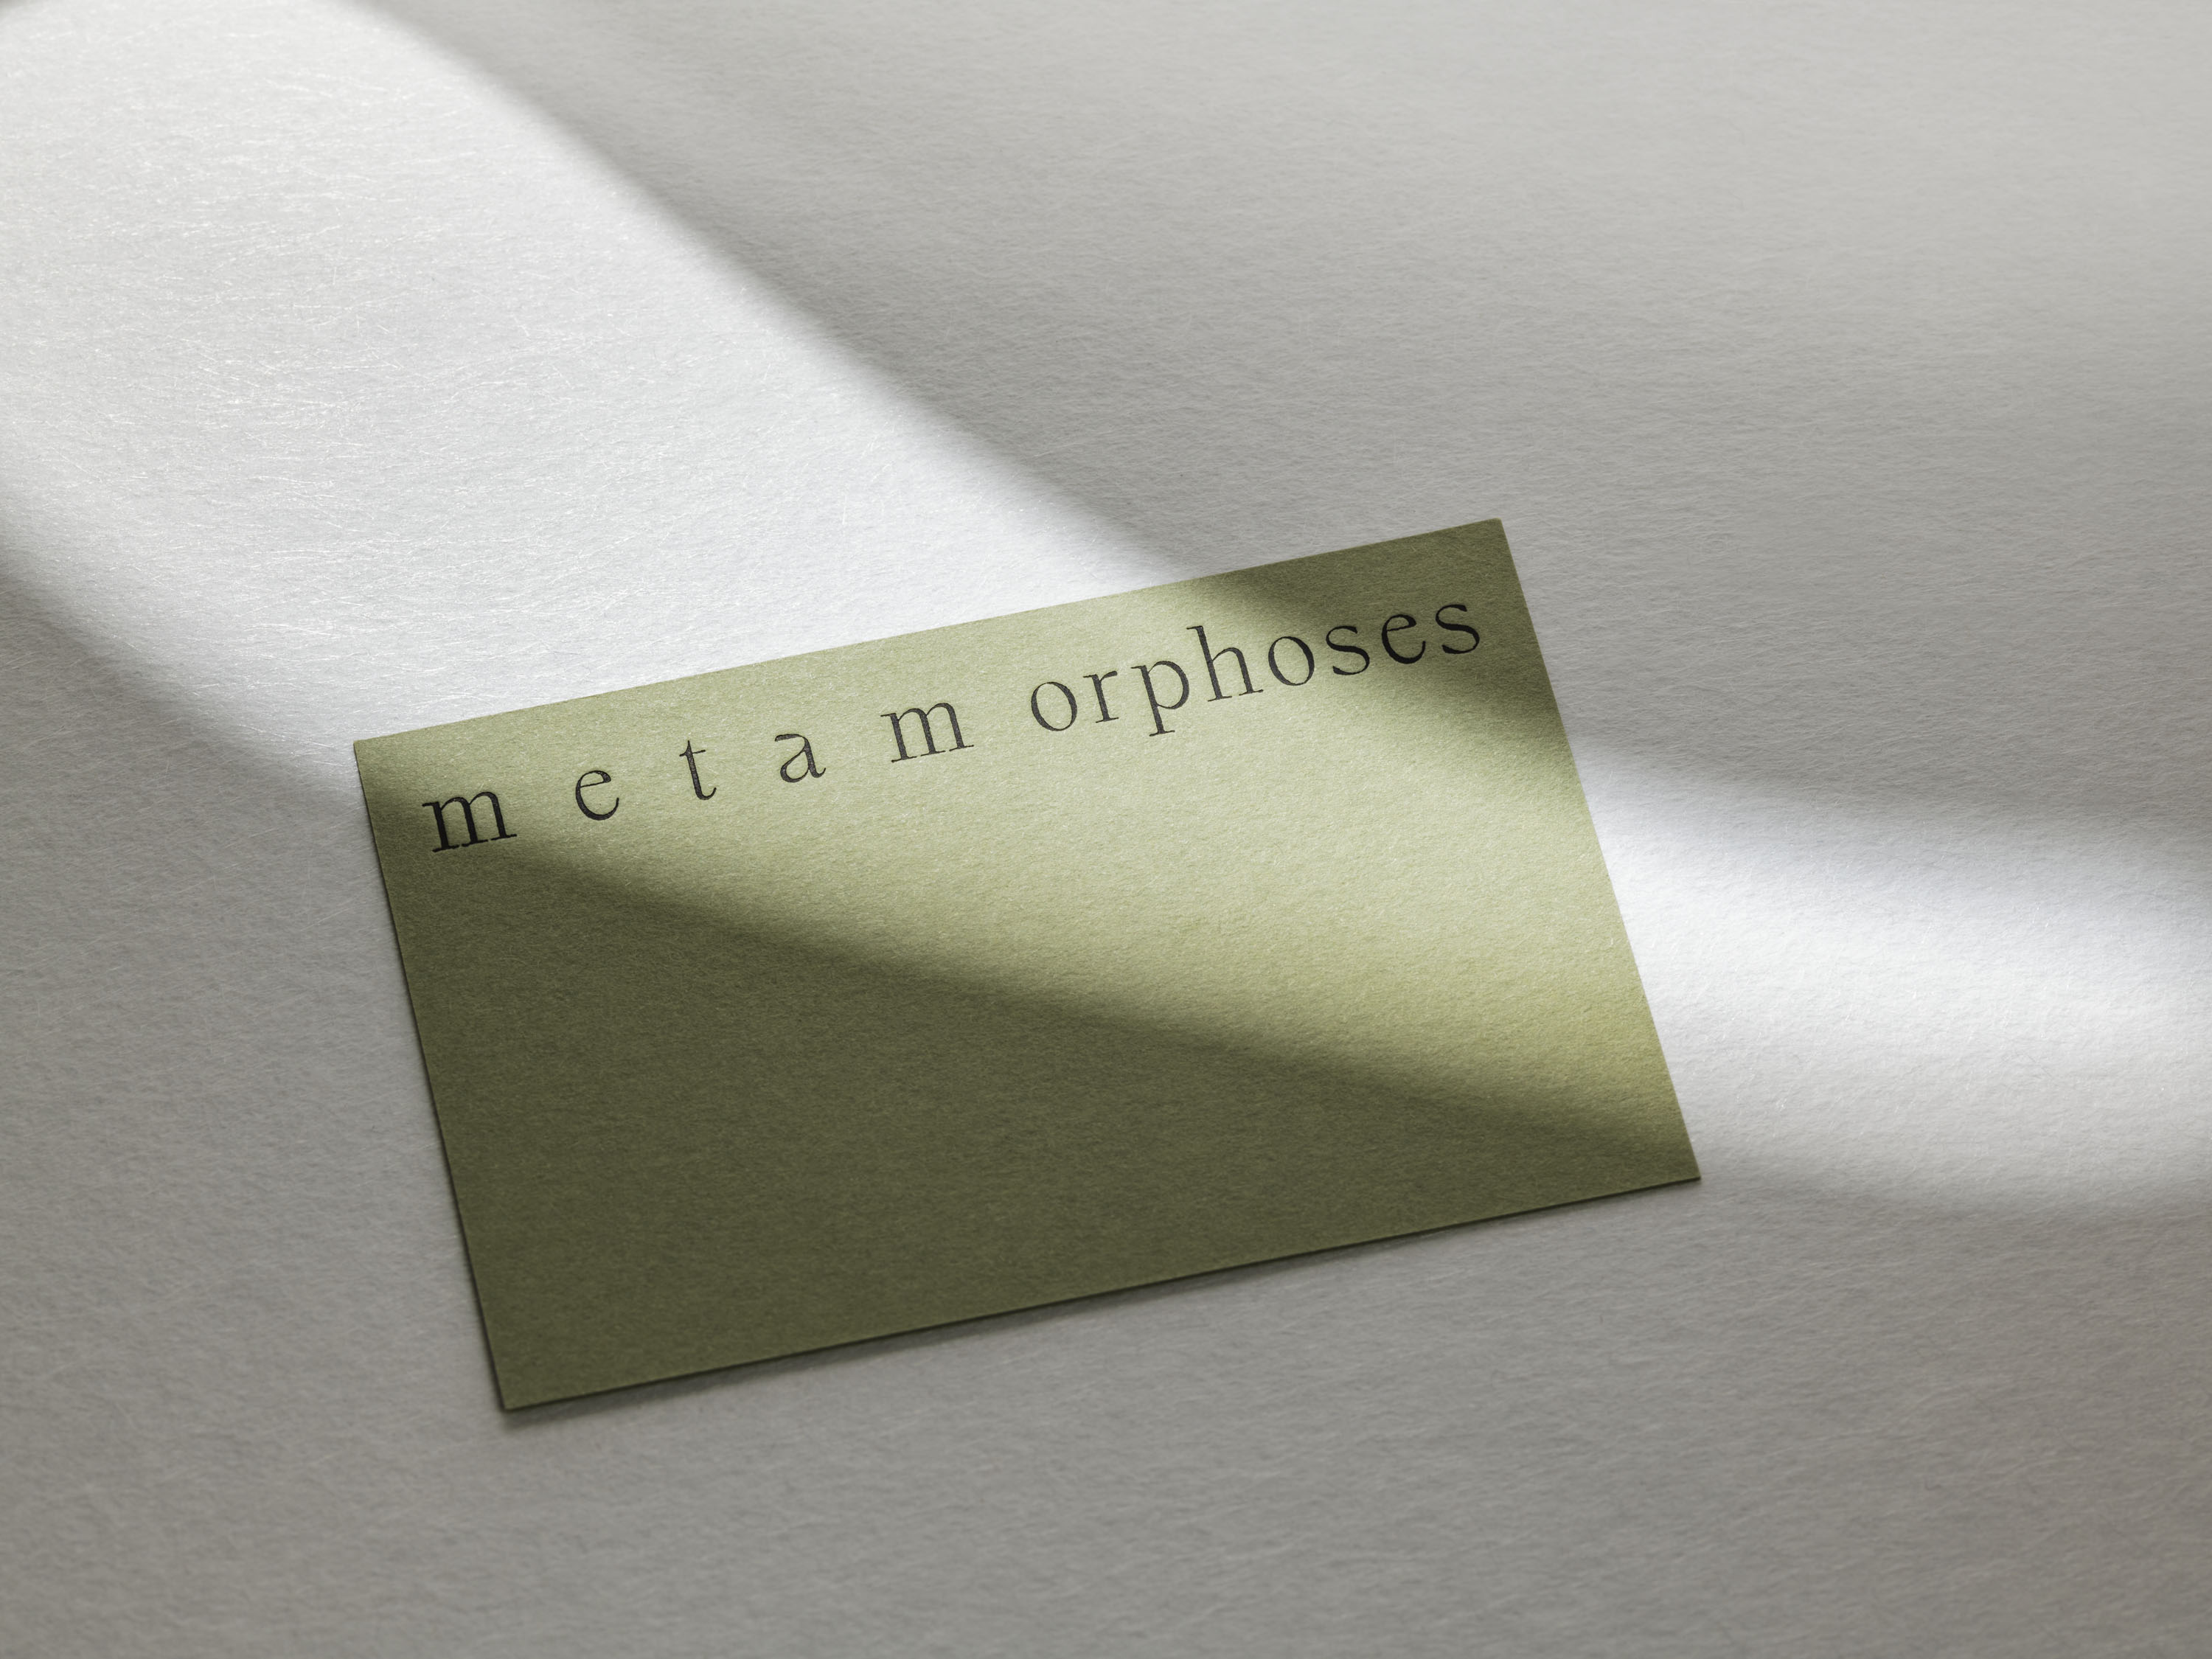 New logotype and visual identity for contemporary gallery Metamorphose designed by A Practice for Everyday Life